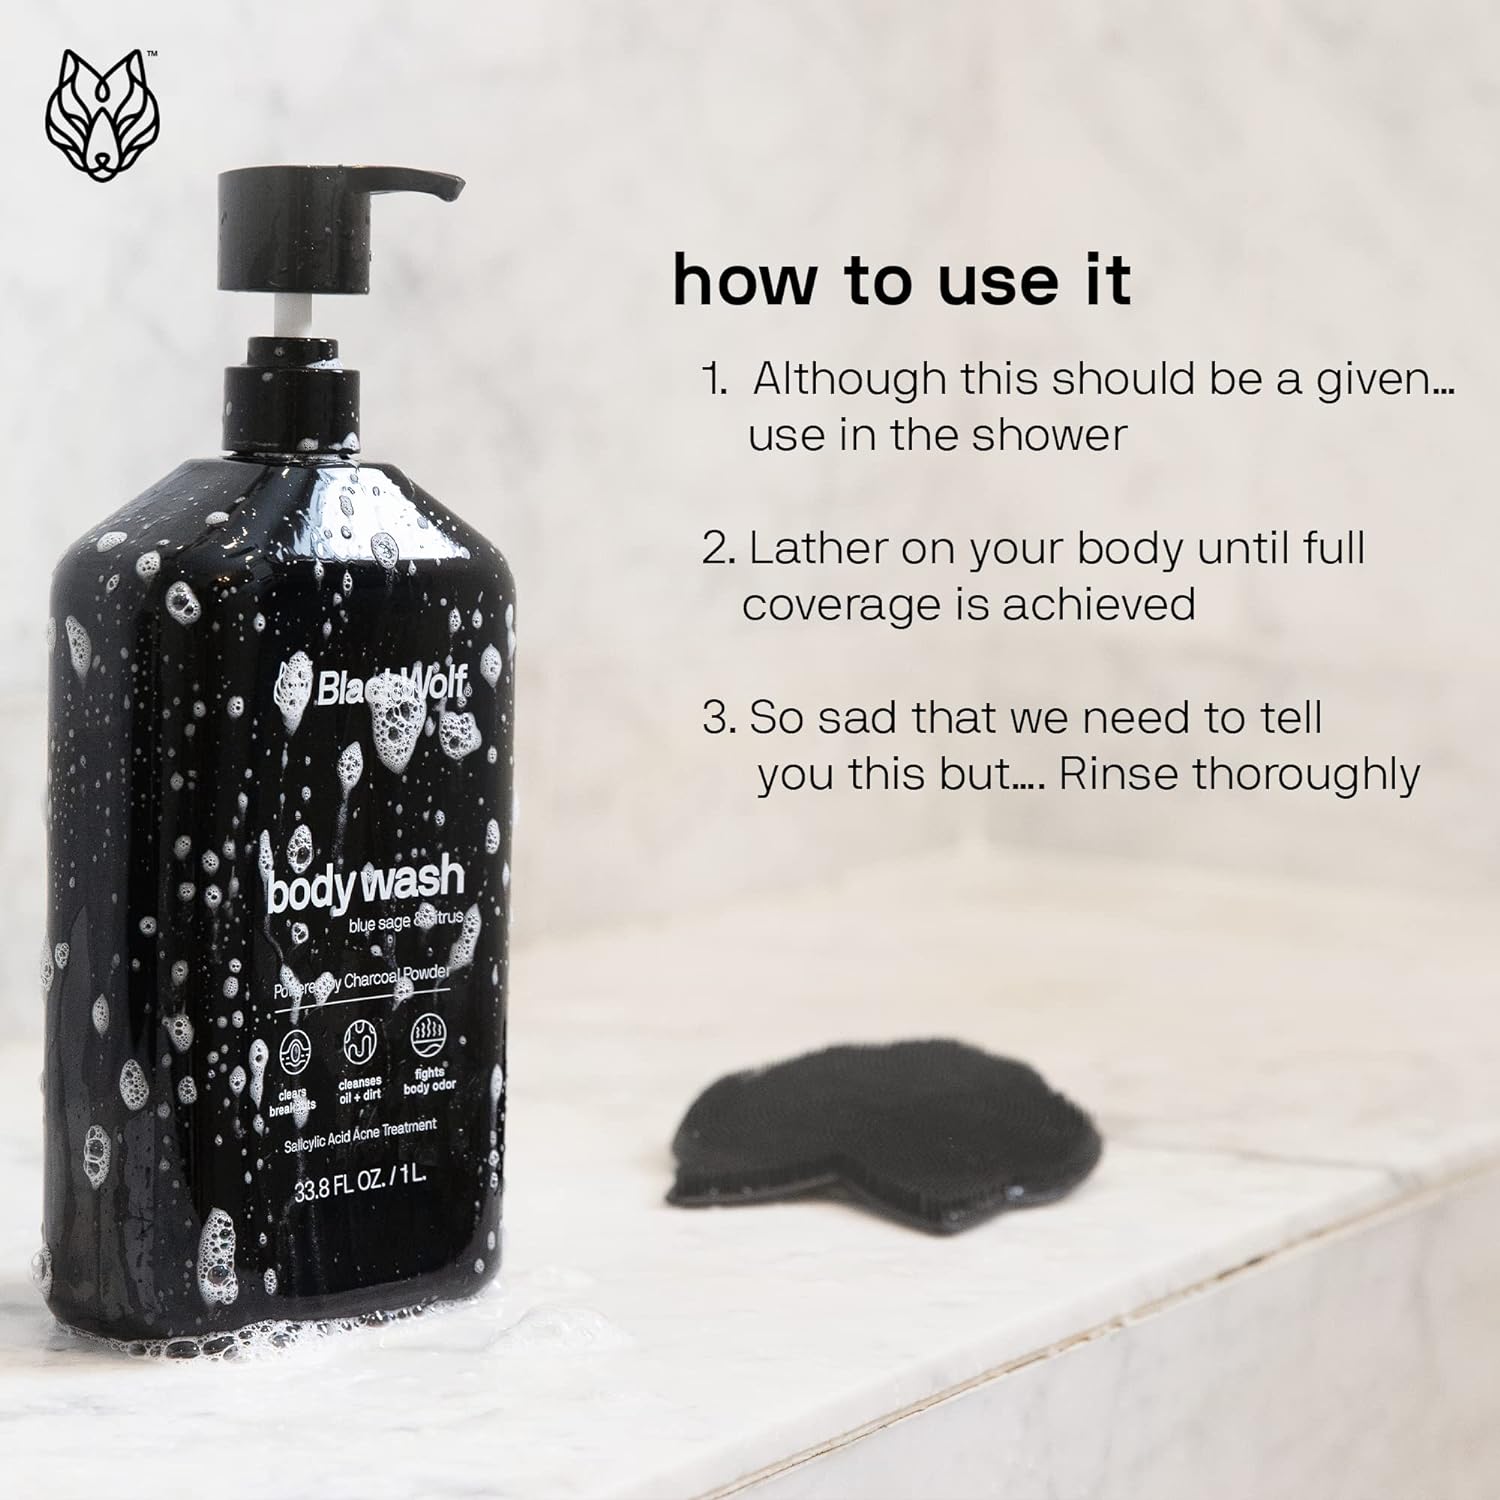 Black Wolf Charcoal Powder Body Wash for Men, 1 Liter - Charcoal Powder & Salicylic Acid Reduce Acne Breakouts & Cleanse Your Skin from Toxins & Impurities - Rich Lather for Full Coverage, Deep Clean : Beauty & Personal Care